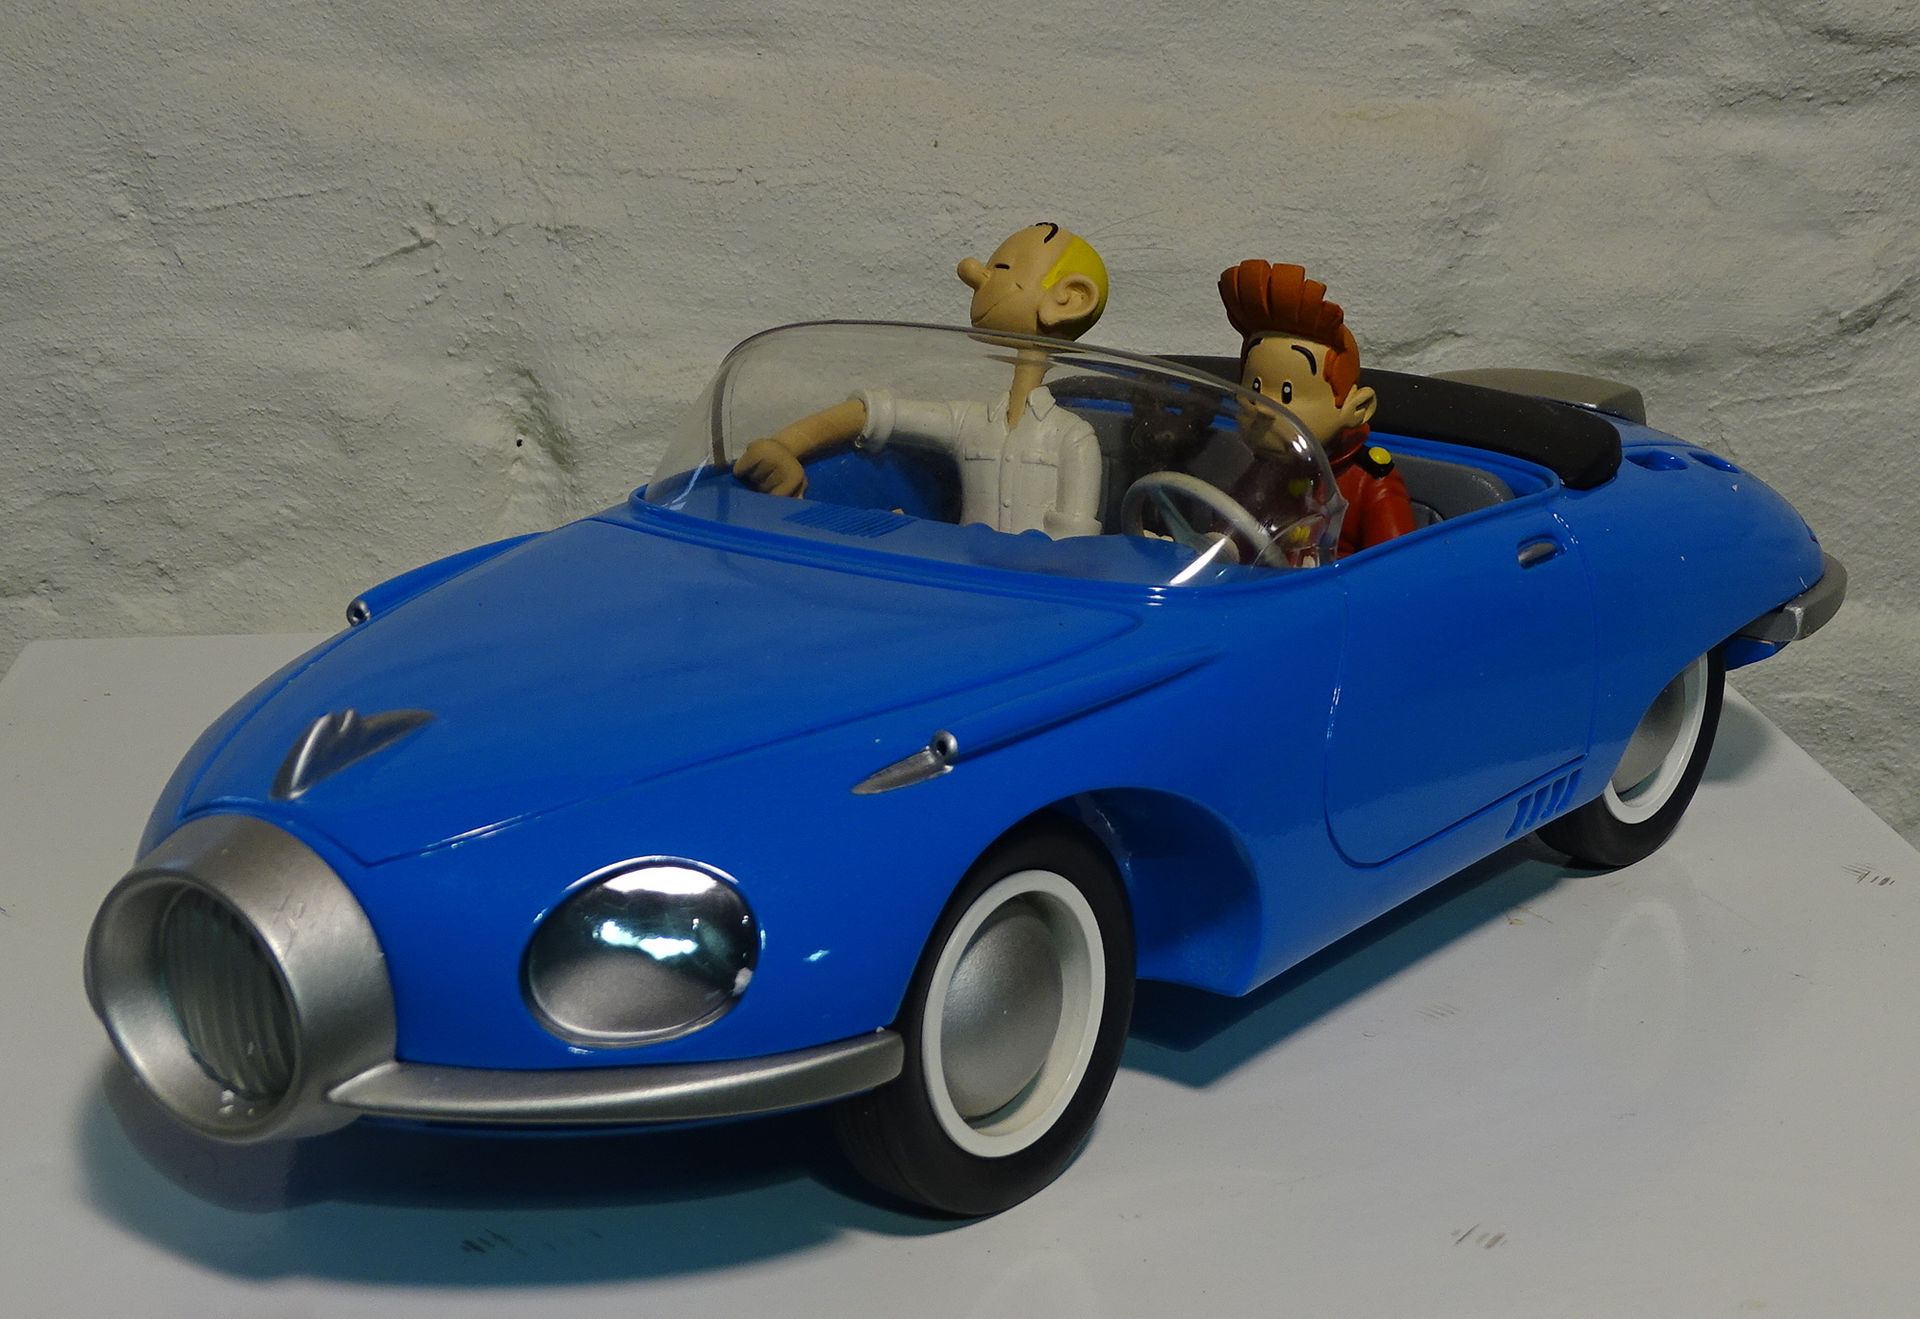 Tintin & Hergé Spirou, Fantasio and Pips in the blue car